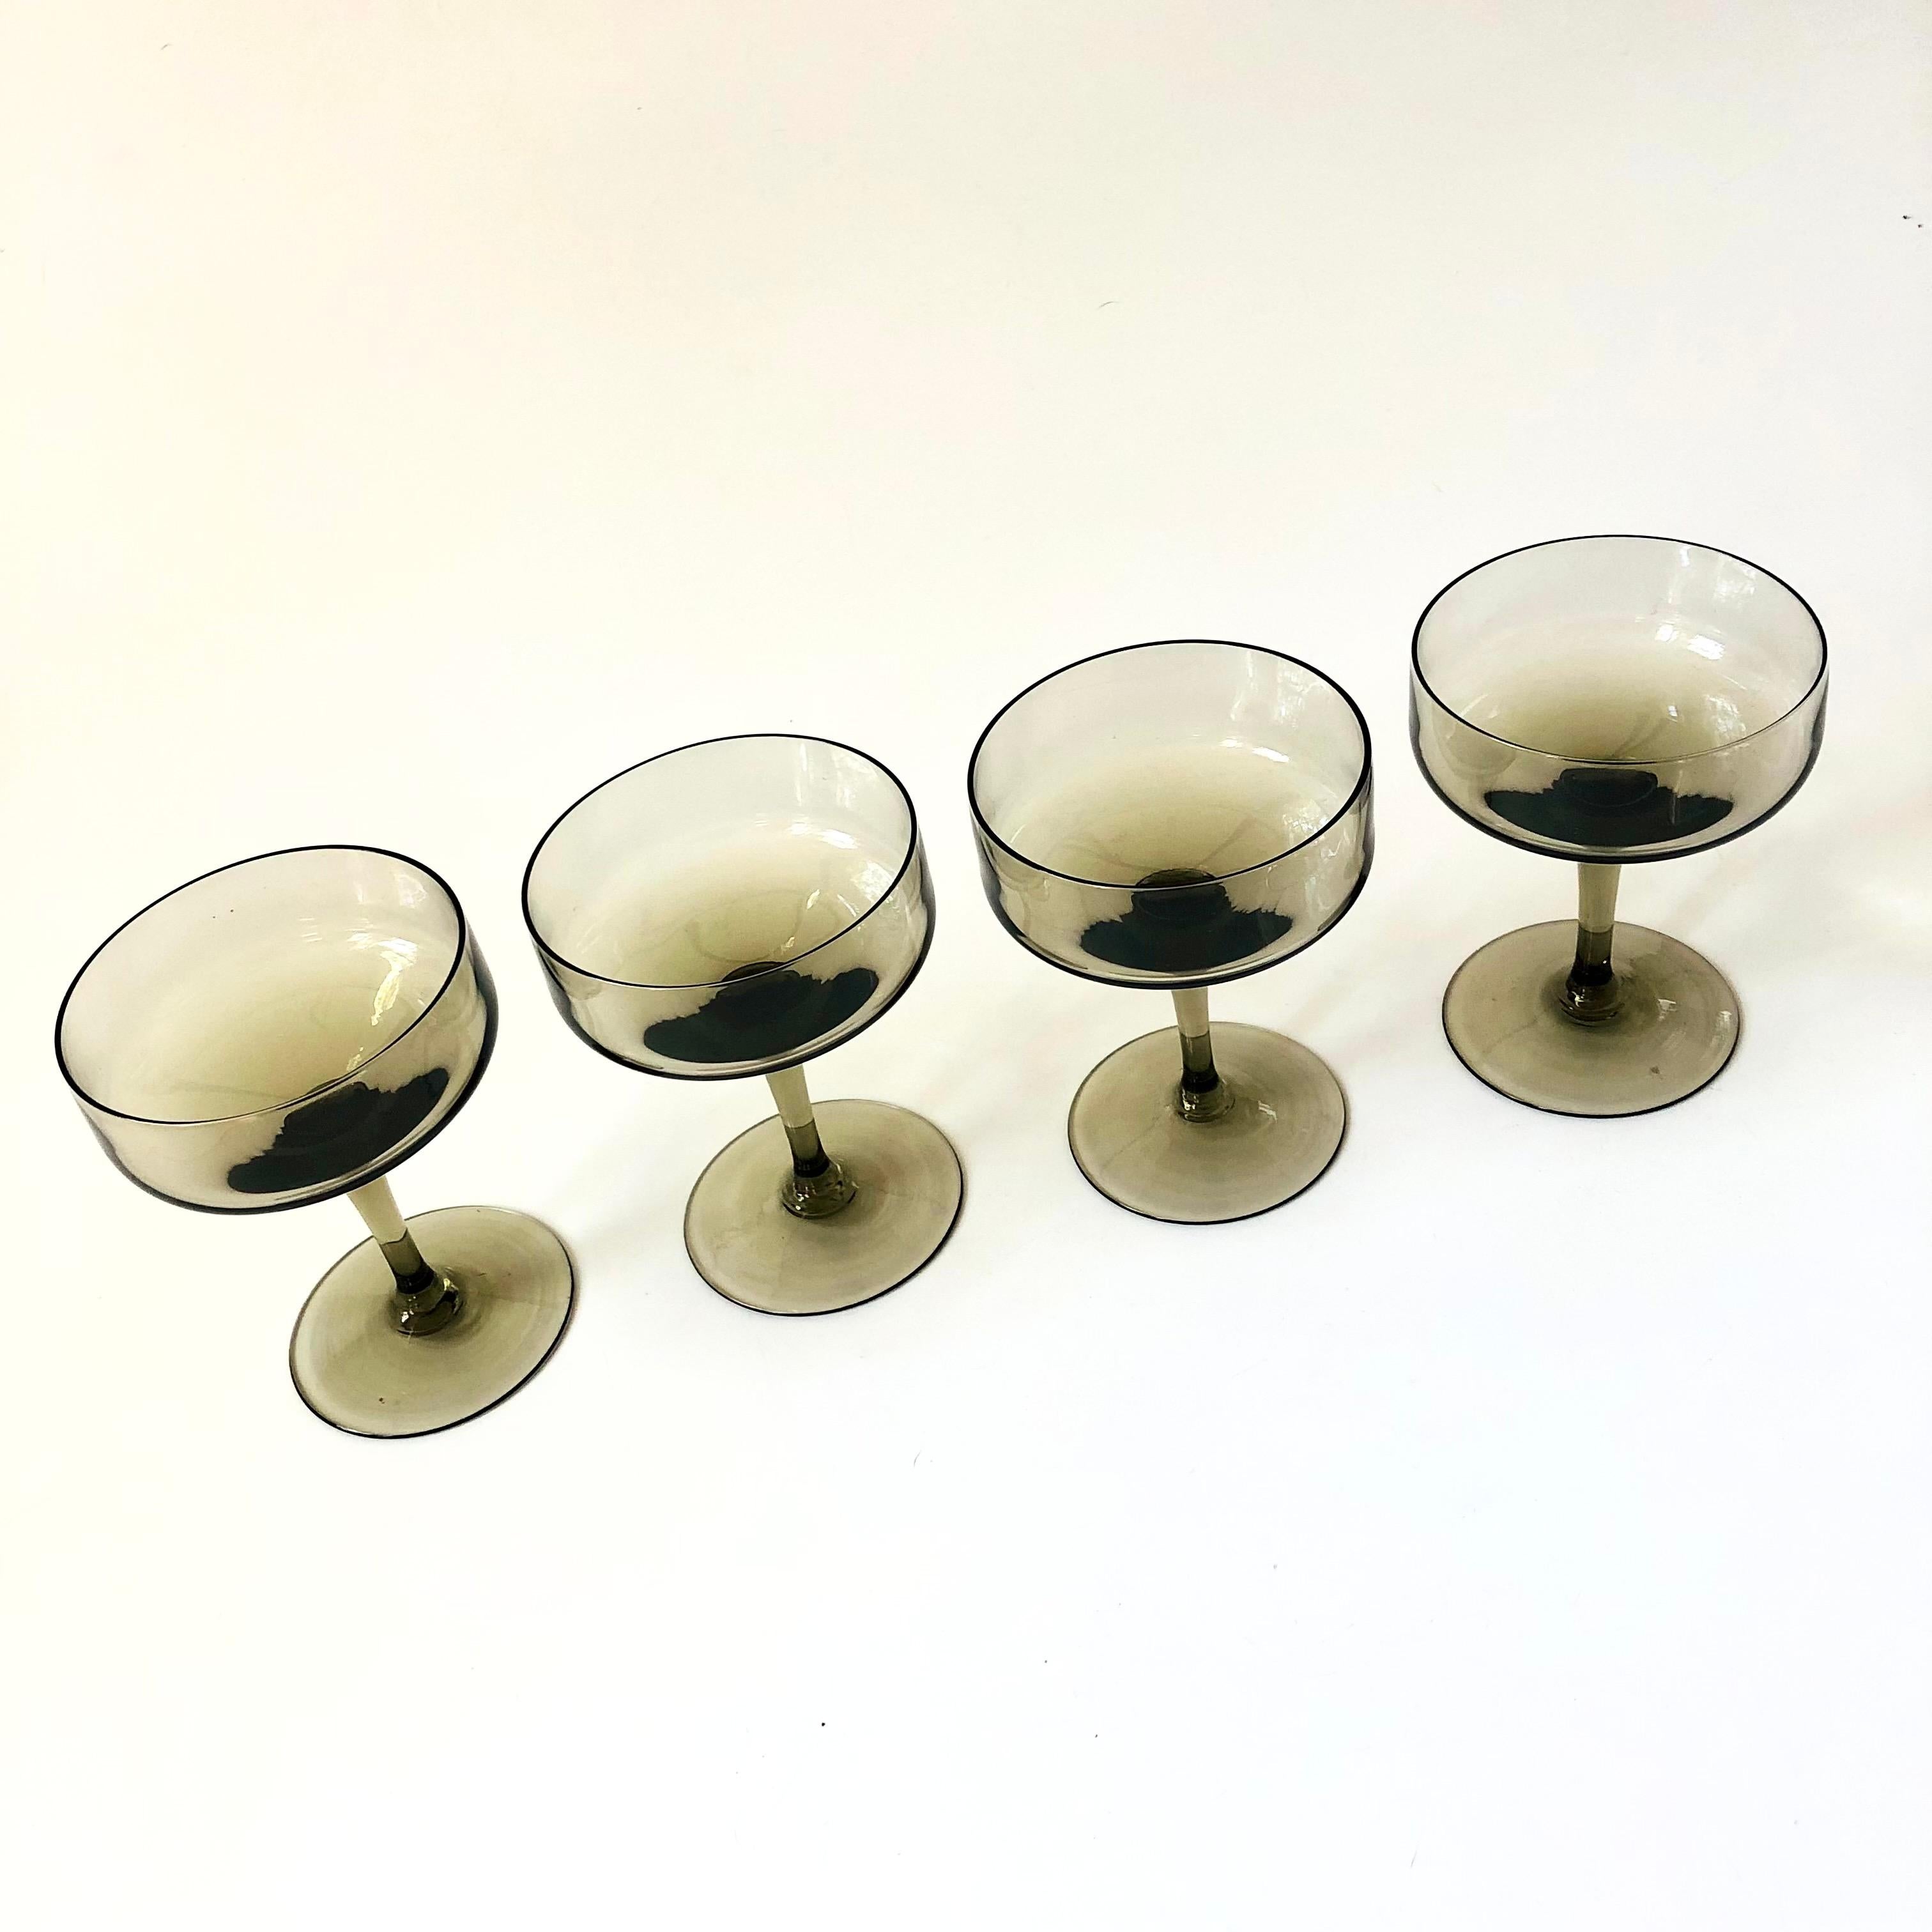 A set of 4 vintage coupe glasses in an elegant Mid Century shape. Each piece has been made in a lovely gray color. Perfect for champagne or wine.

